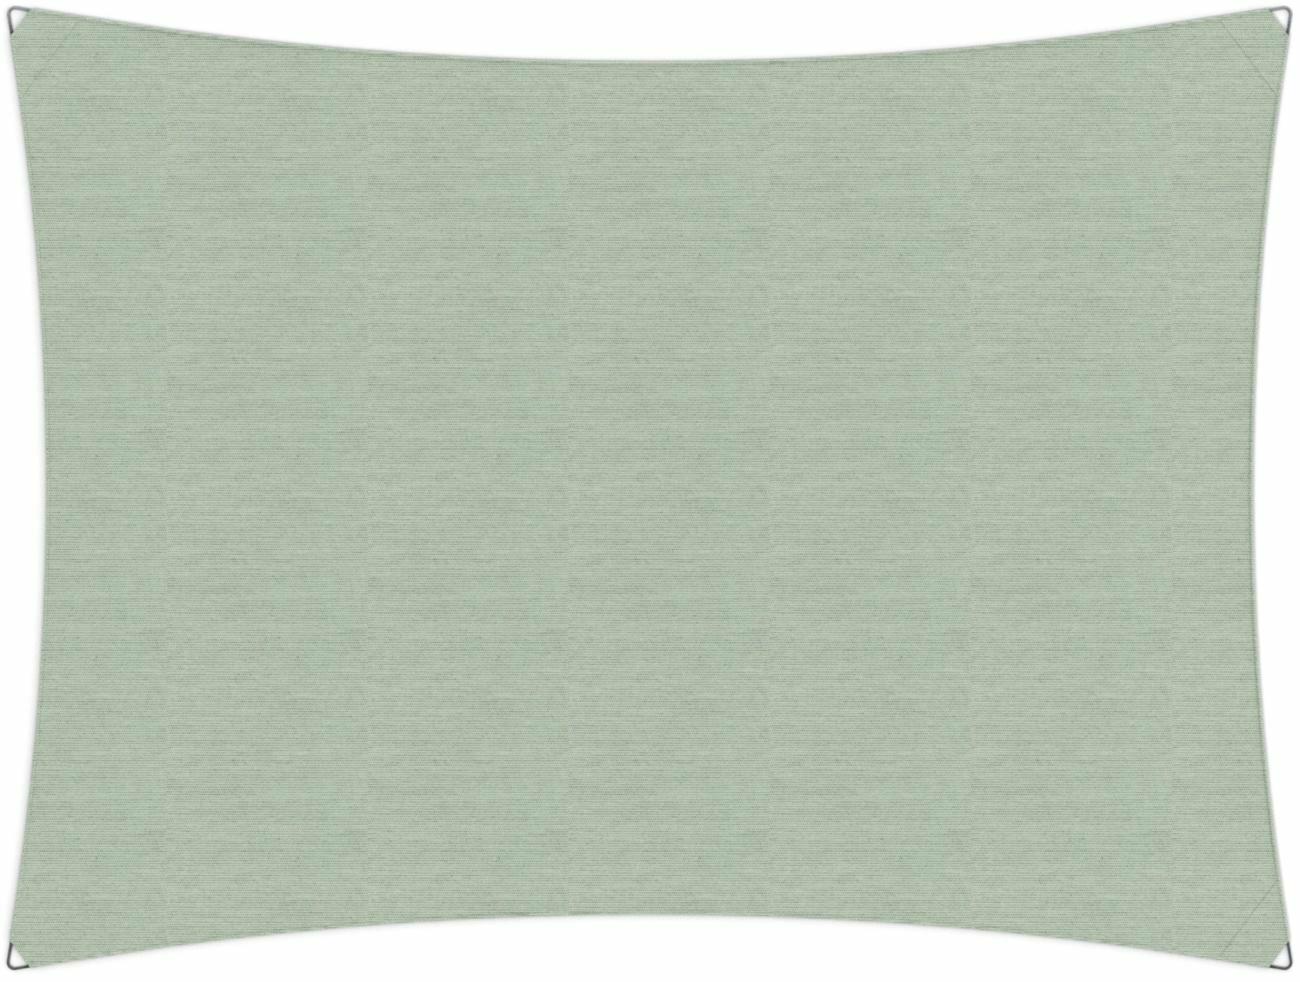 Ingenua shade sail Rectangle 4 x 3 m, for outdoor use. Colour of the fabric shade sail Mint.